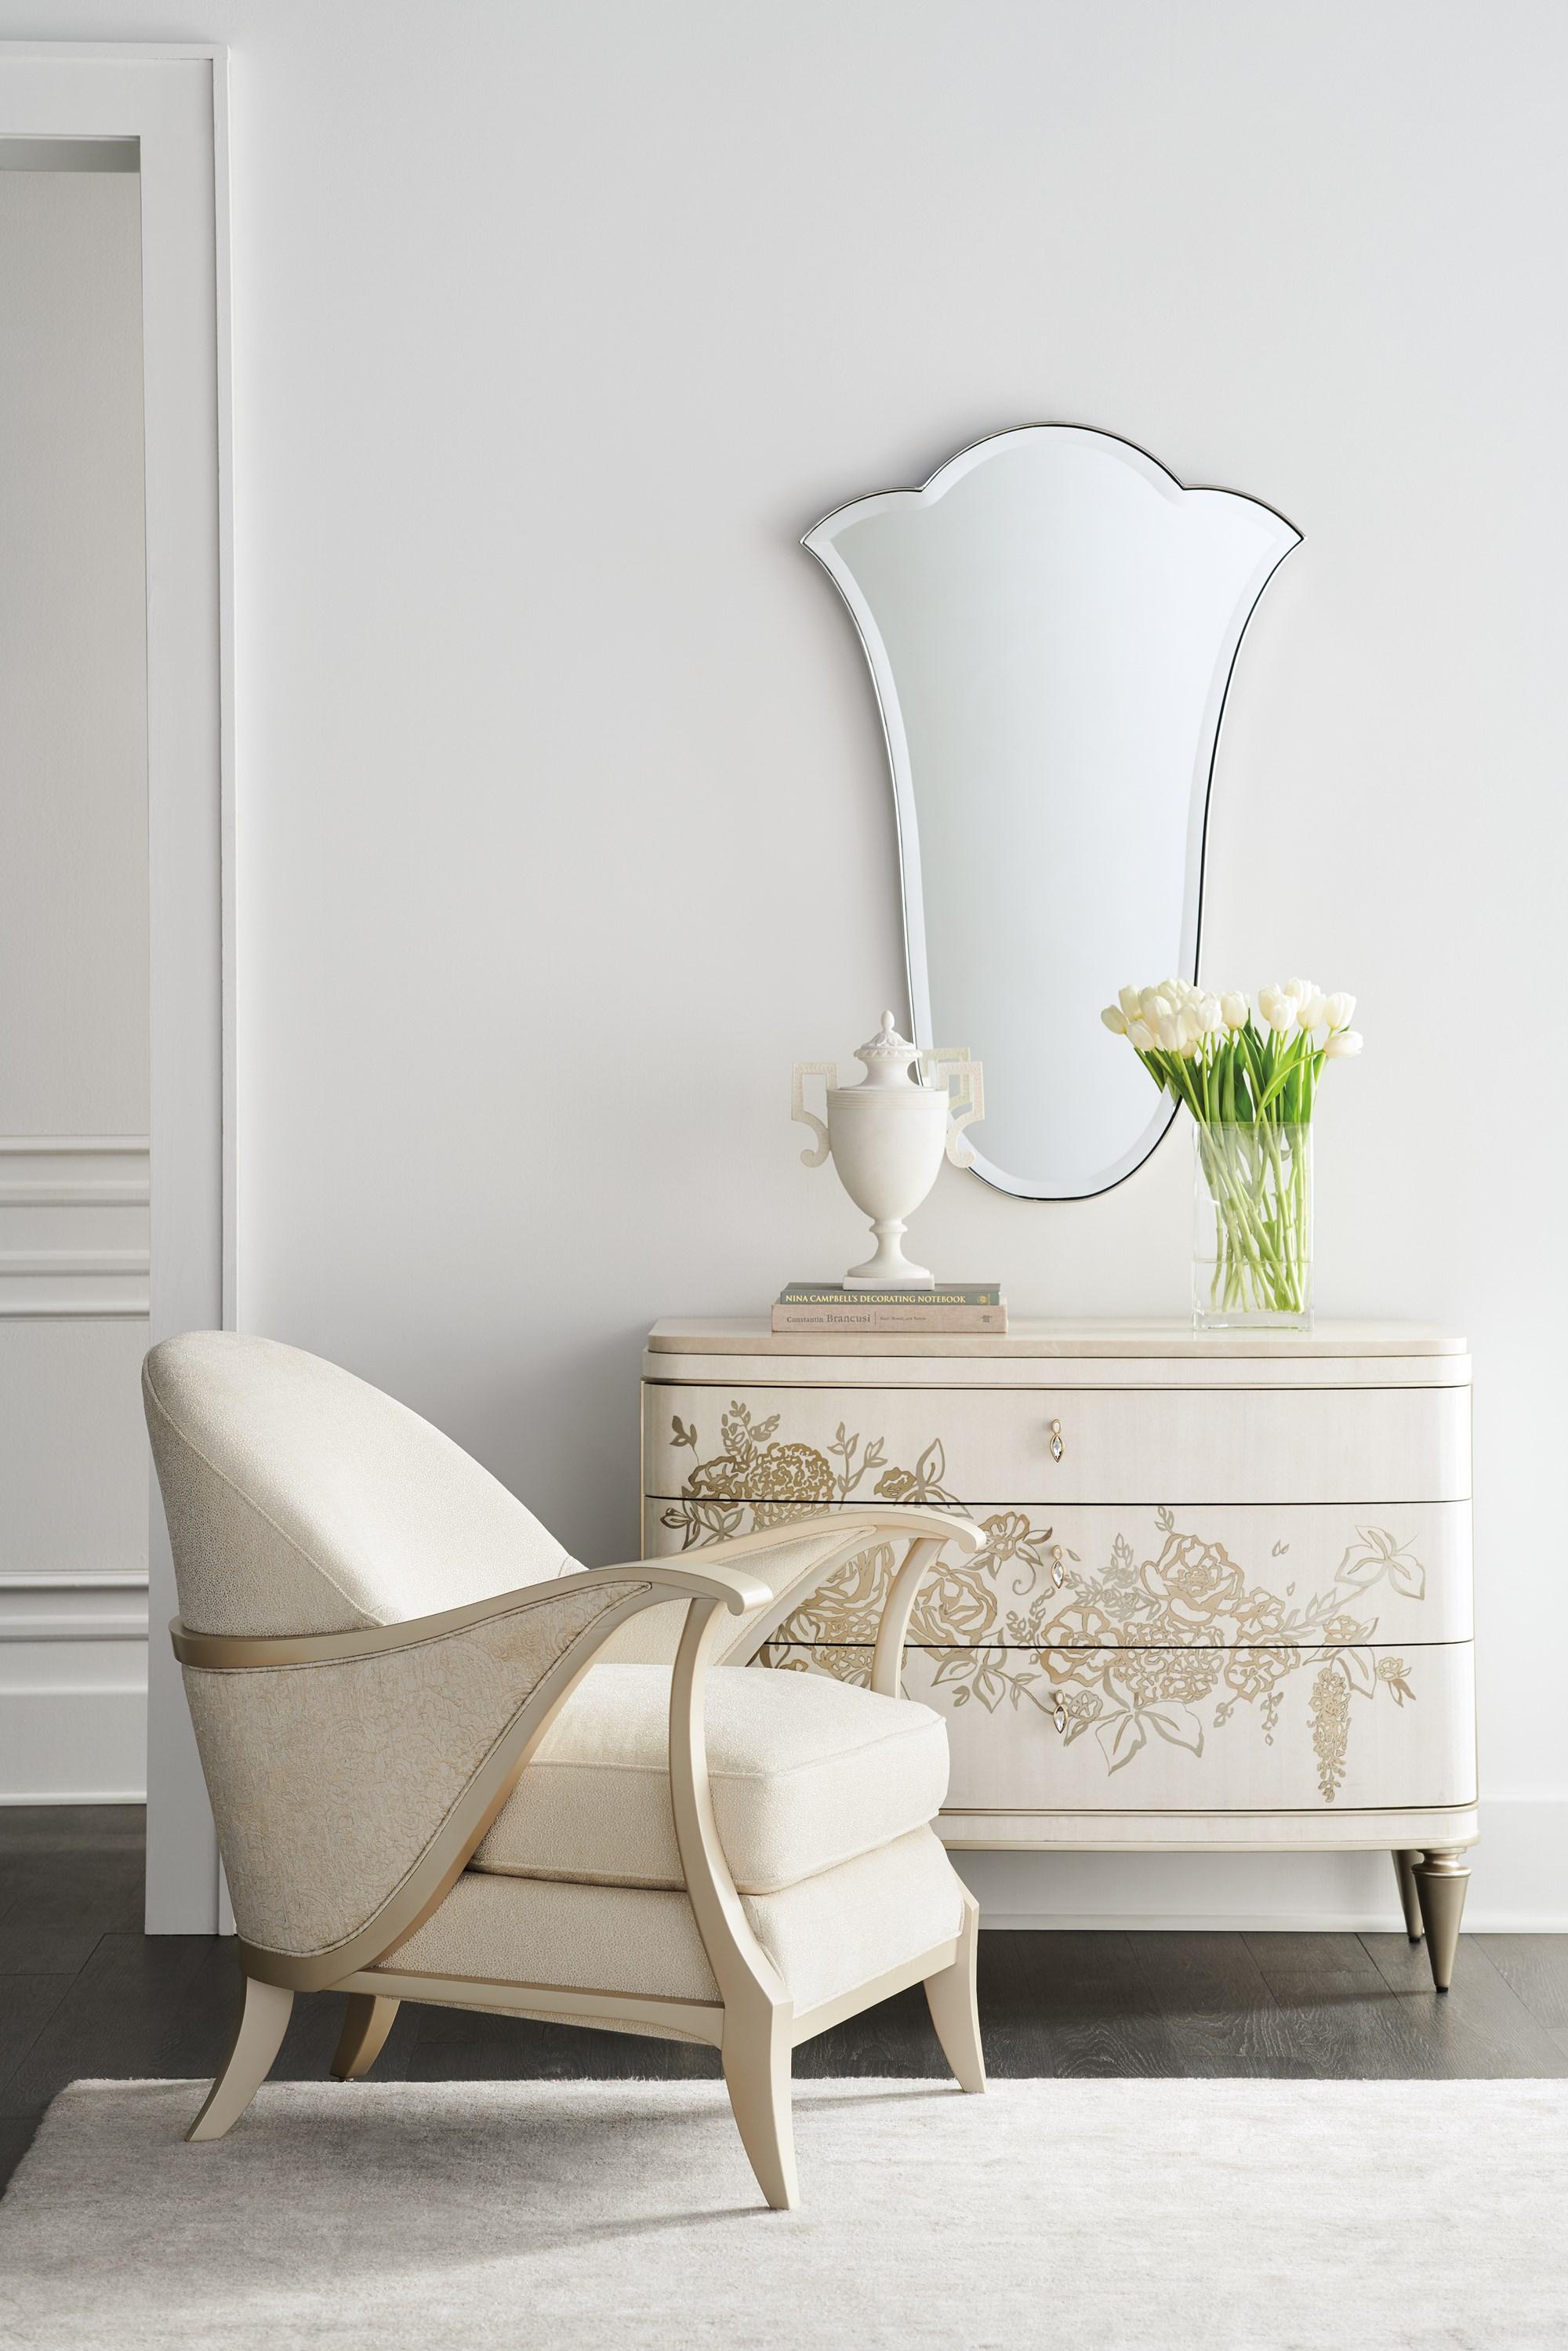 

    
Pearl Finish & Rich Damask Patterm Accent Chair CURTSY by Caracole
